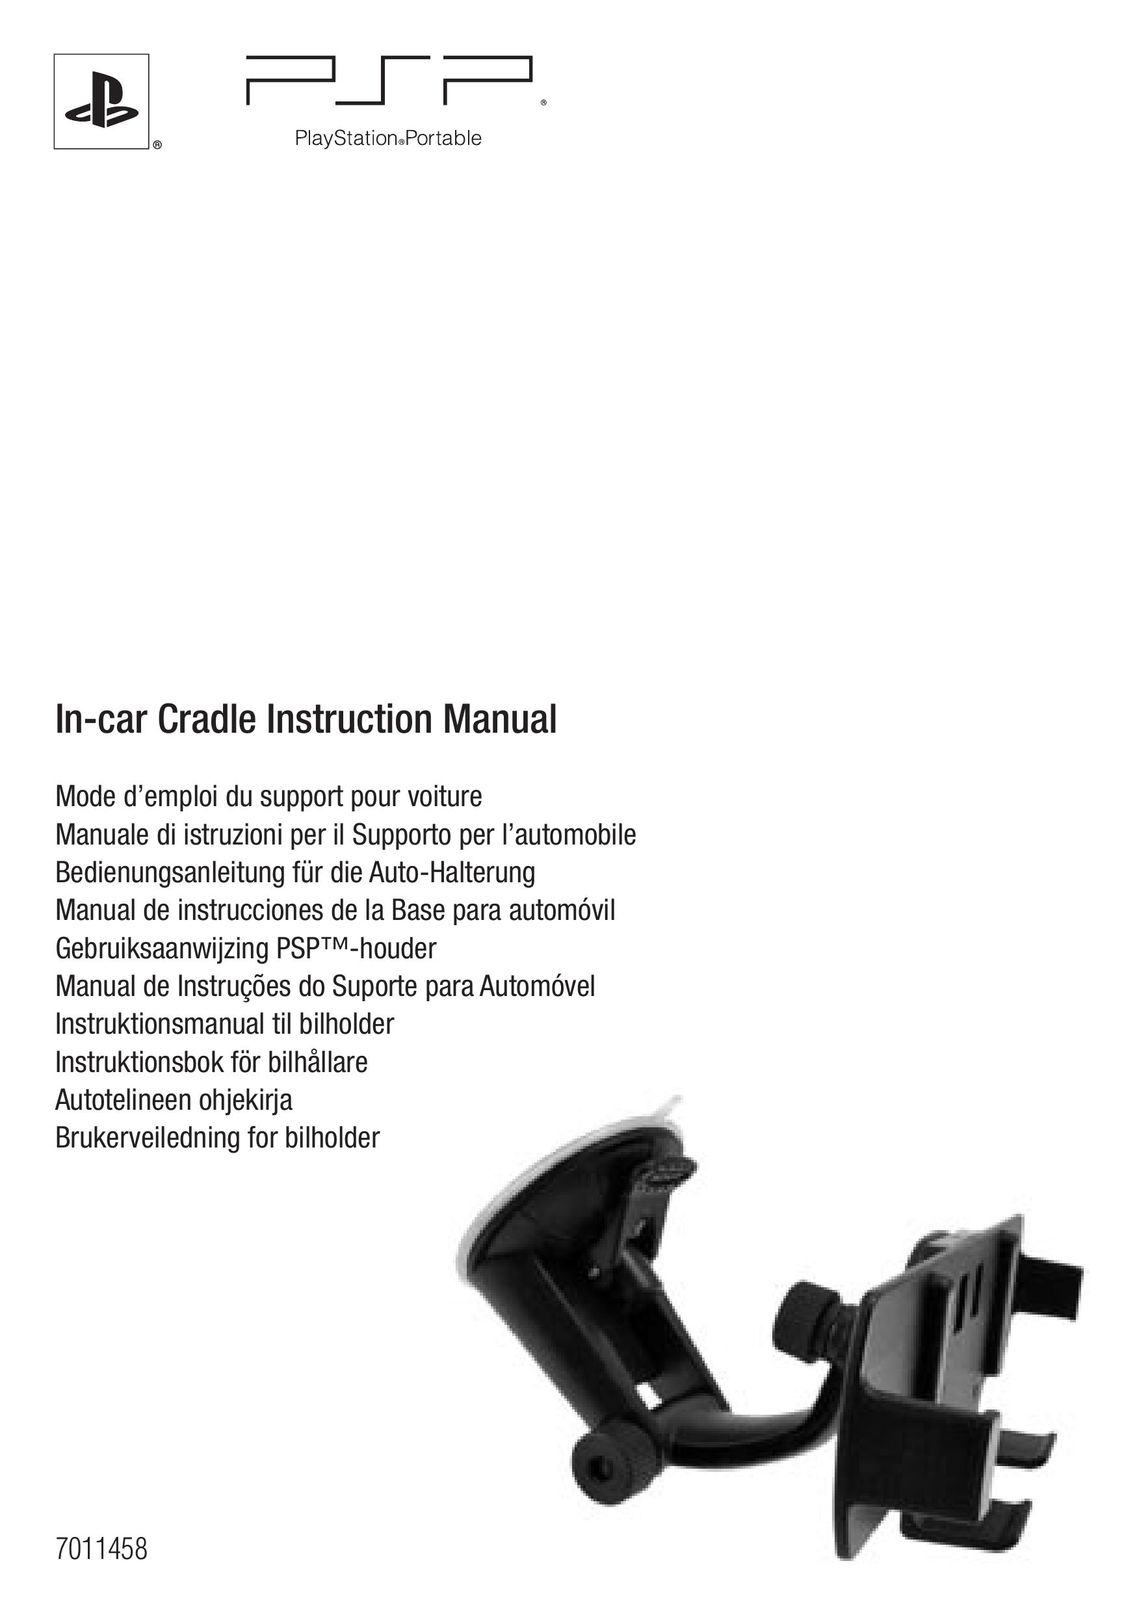 Sony In-car Cradle Electronic Accessory User Manual